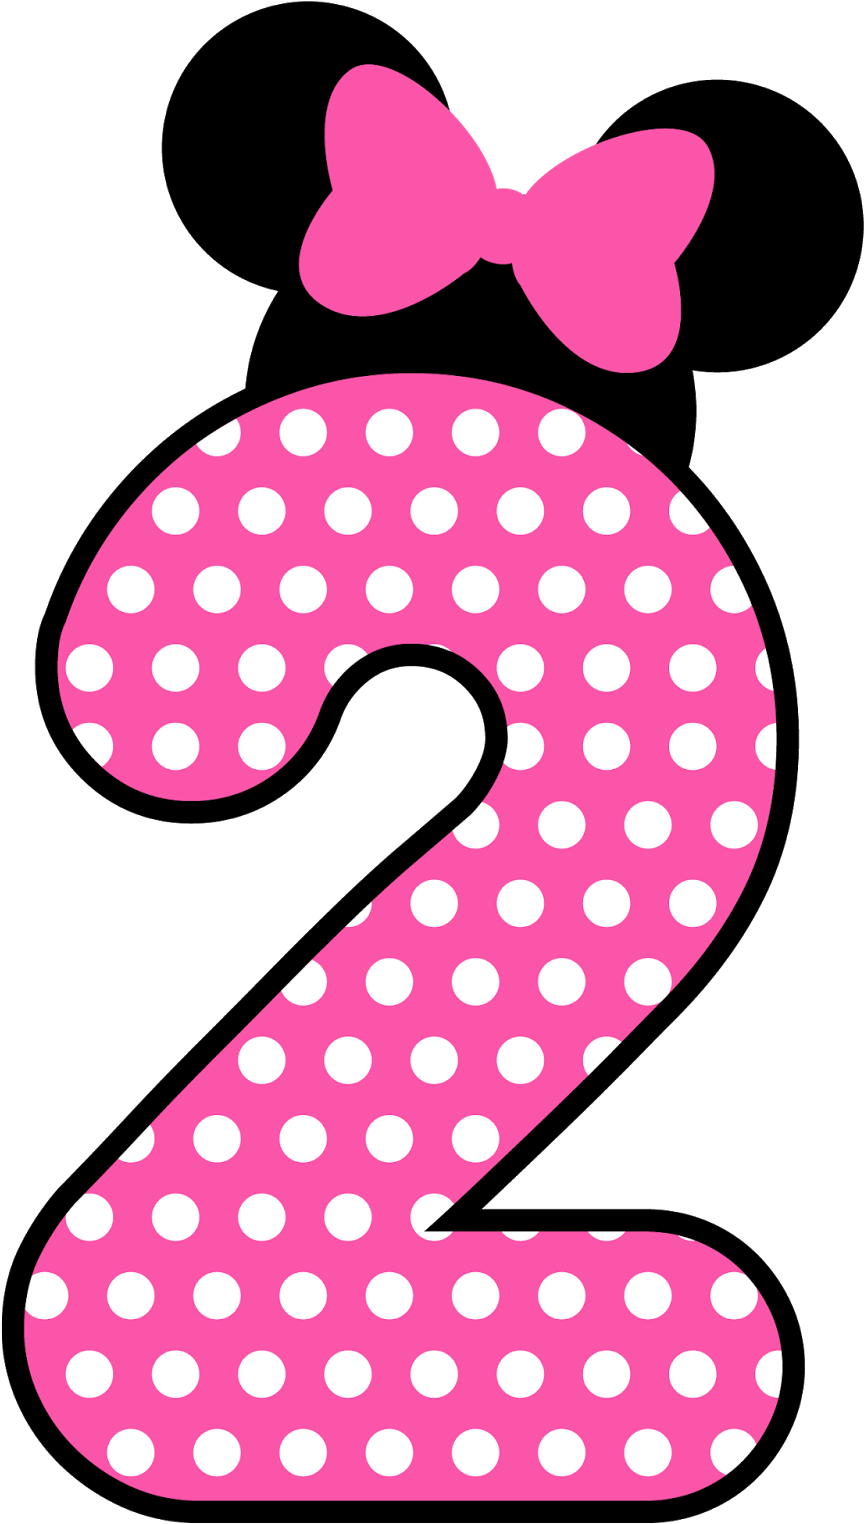 A Pink And White Polka Dot Number